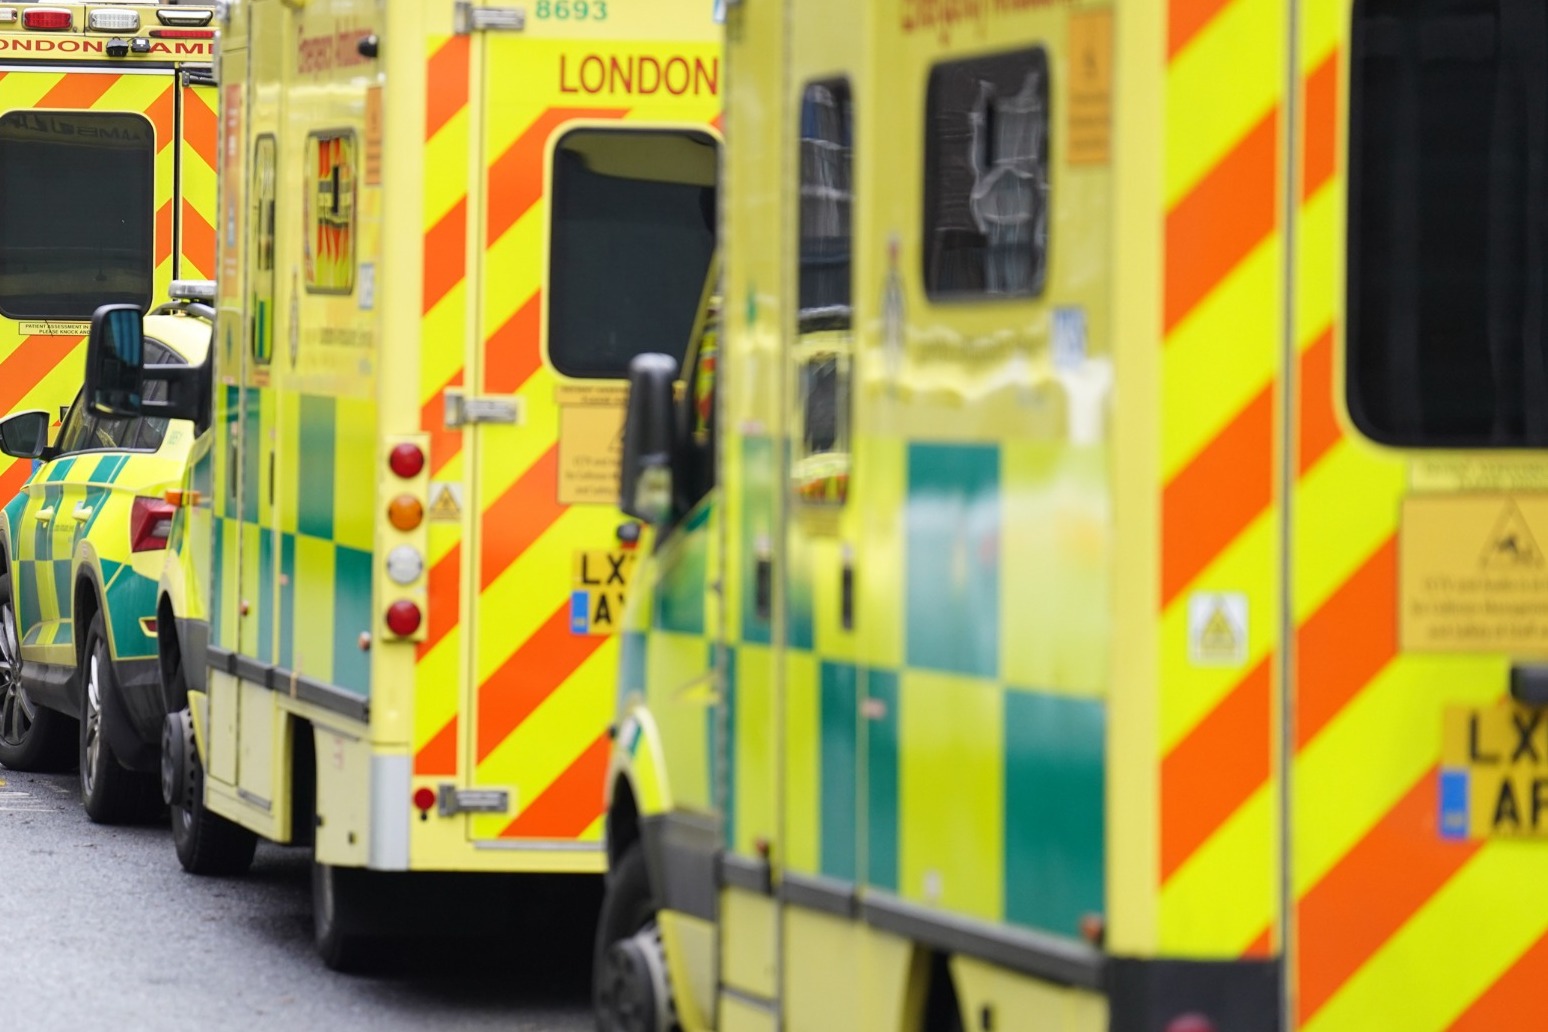 ‘Unprecedented’ attacks on 11 ambulance staff condemned as disgraceful 